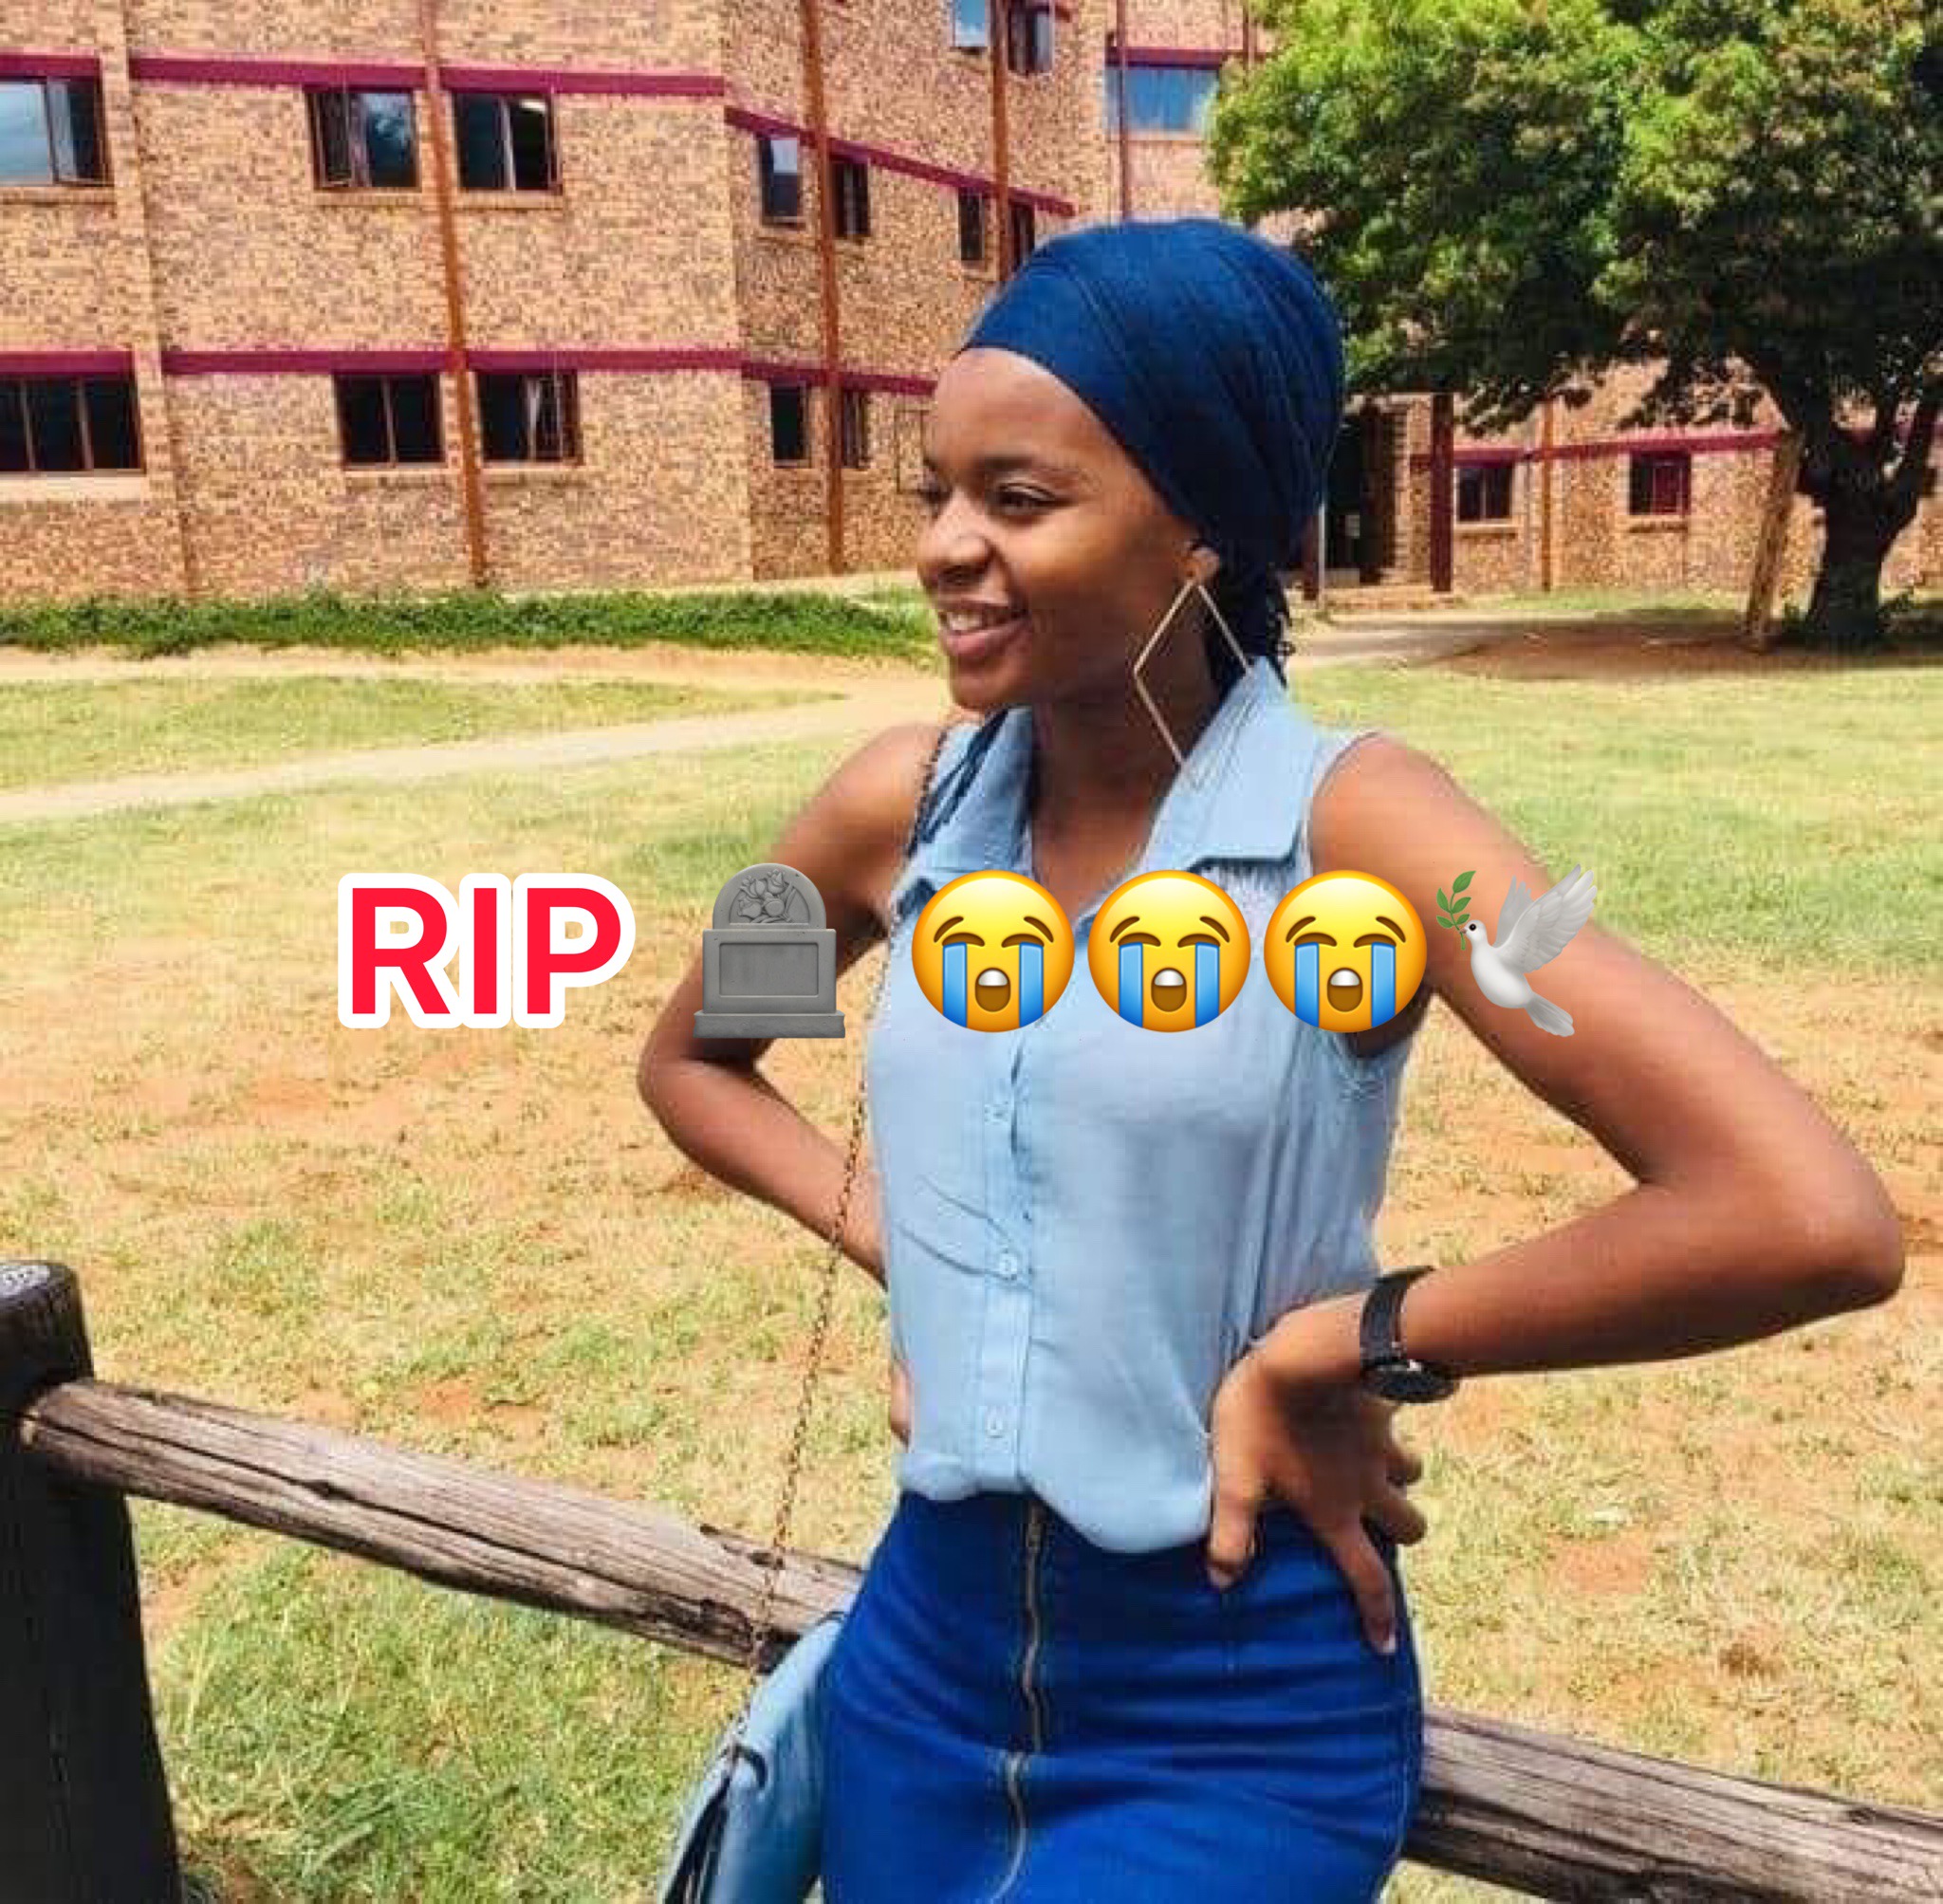 A Turf Medical student was killed with only 4 months left to finish her degree. See who killed Her 1